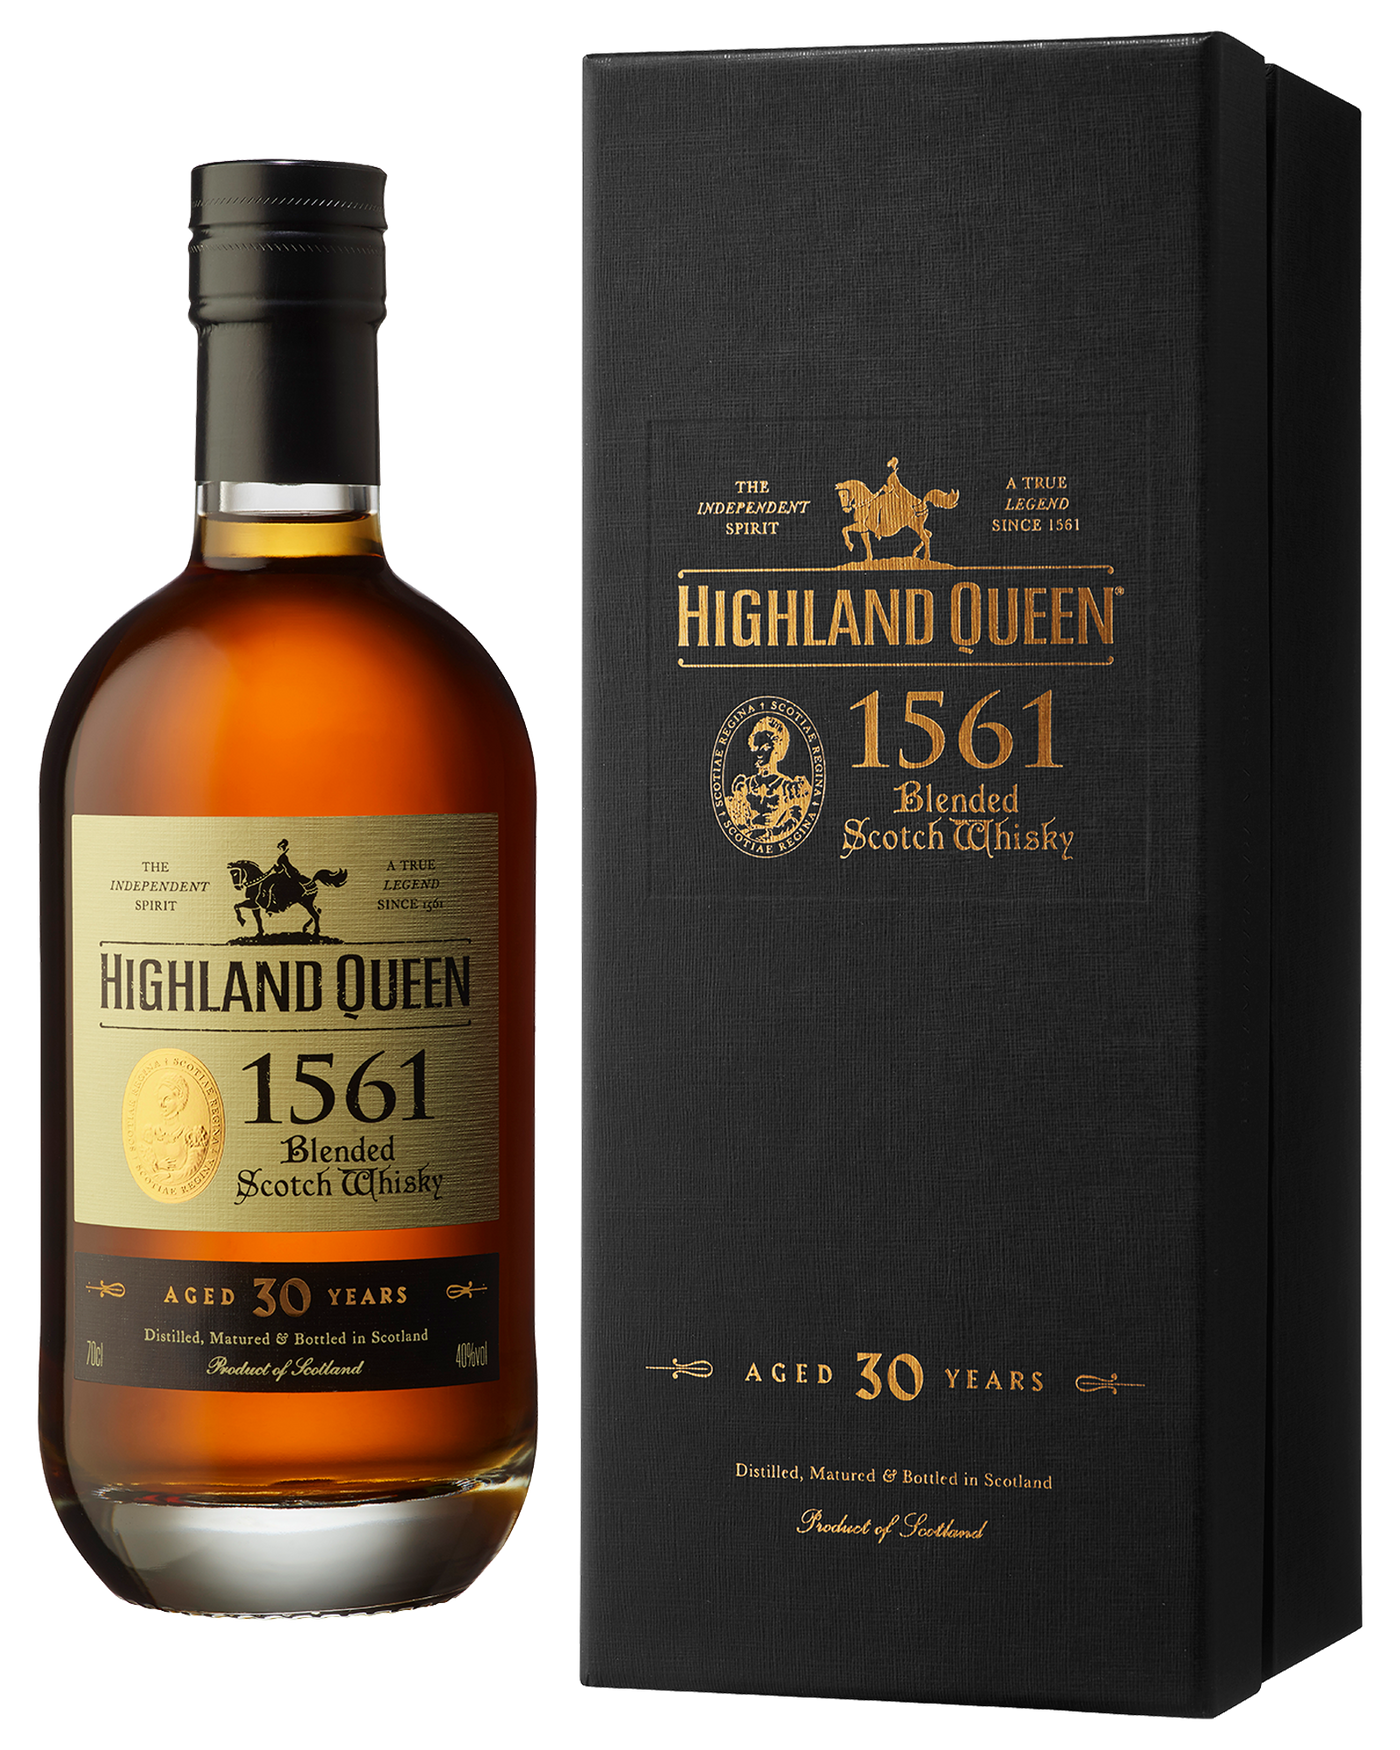 BUY] Highland Queen 1561 30 Year Old Scotch Whisky at CaskCartel.com